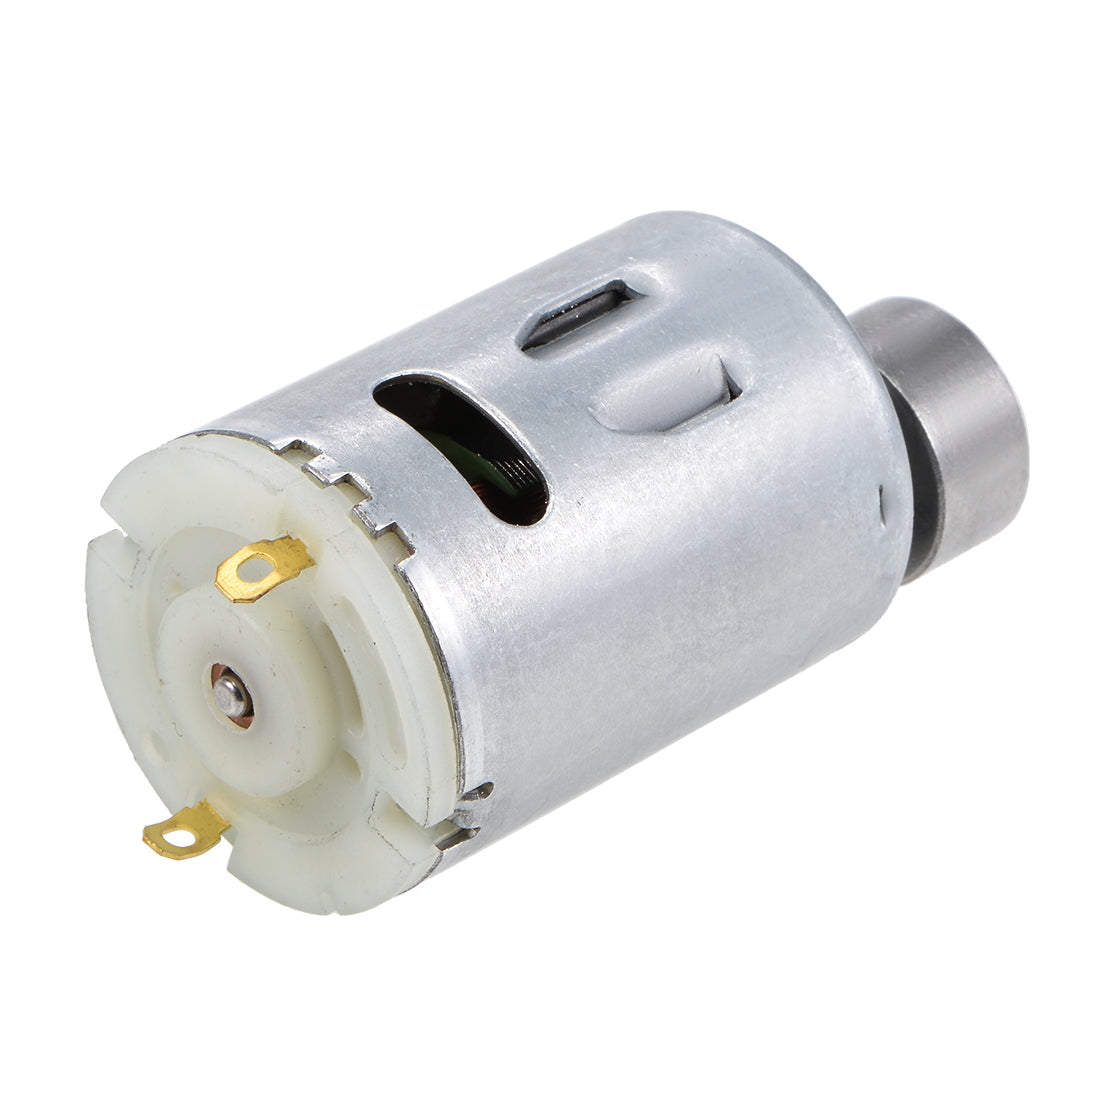 uxcell Uxcell Vibration Motors DC 12V 250mA 4400RPM Vibrating Motor Strong Power for DIY Electric  Massager 72x35.5mm